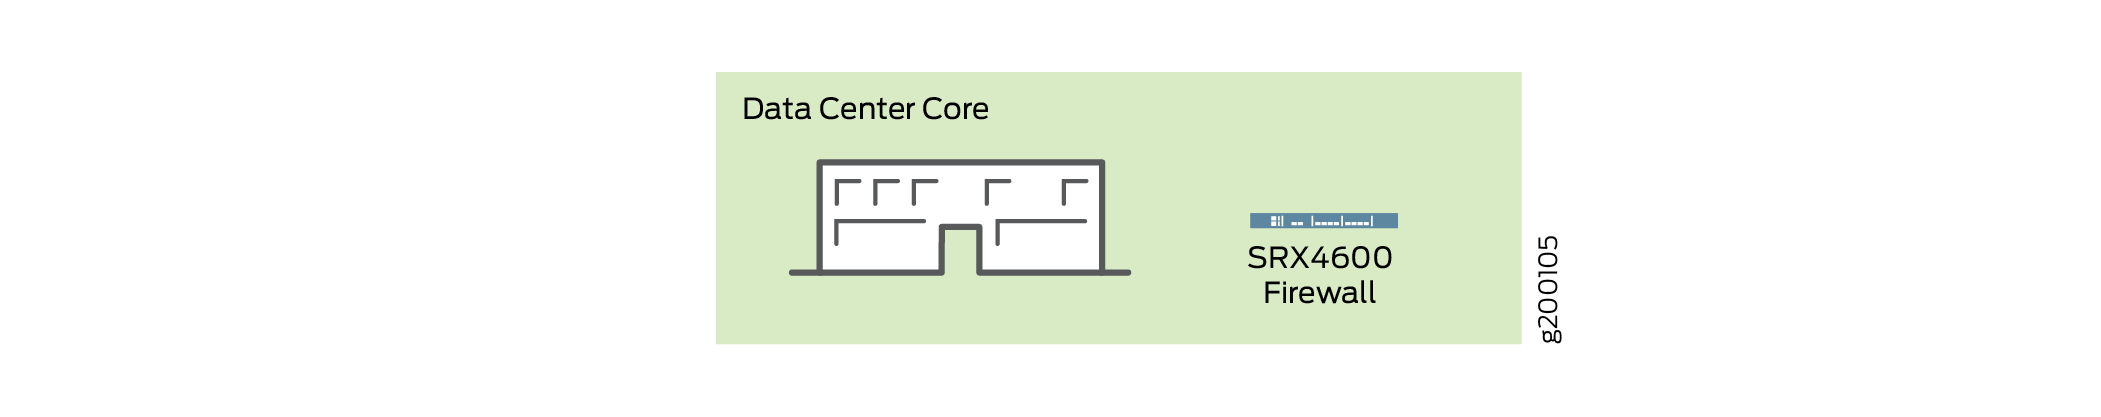 Deploying the SRX4600 Services Gateway at the Data Center Core